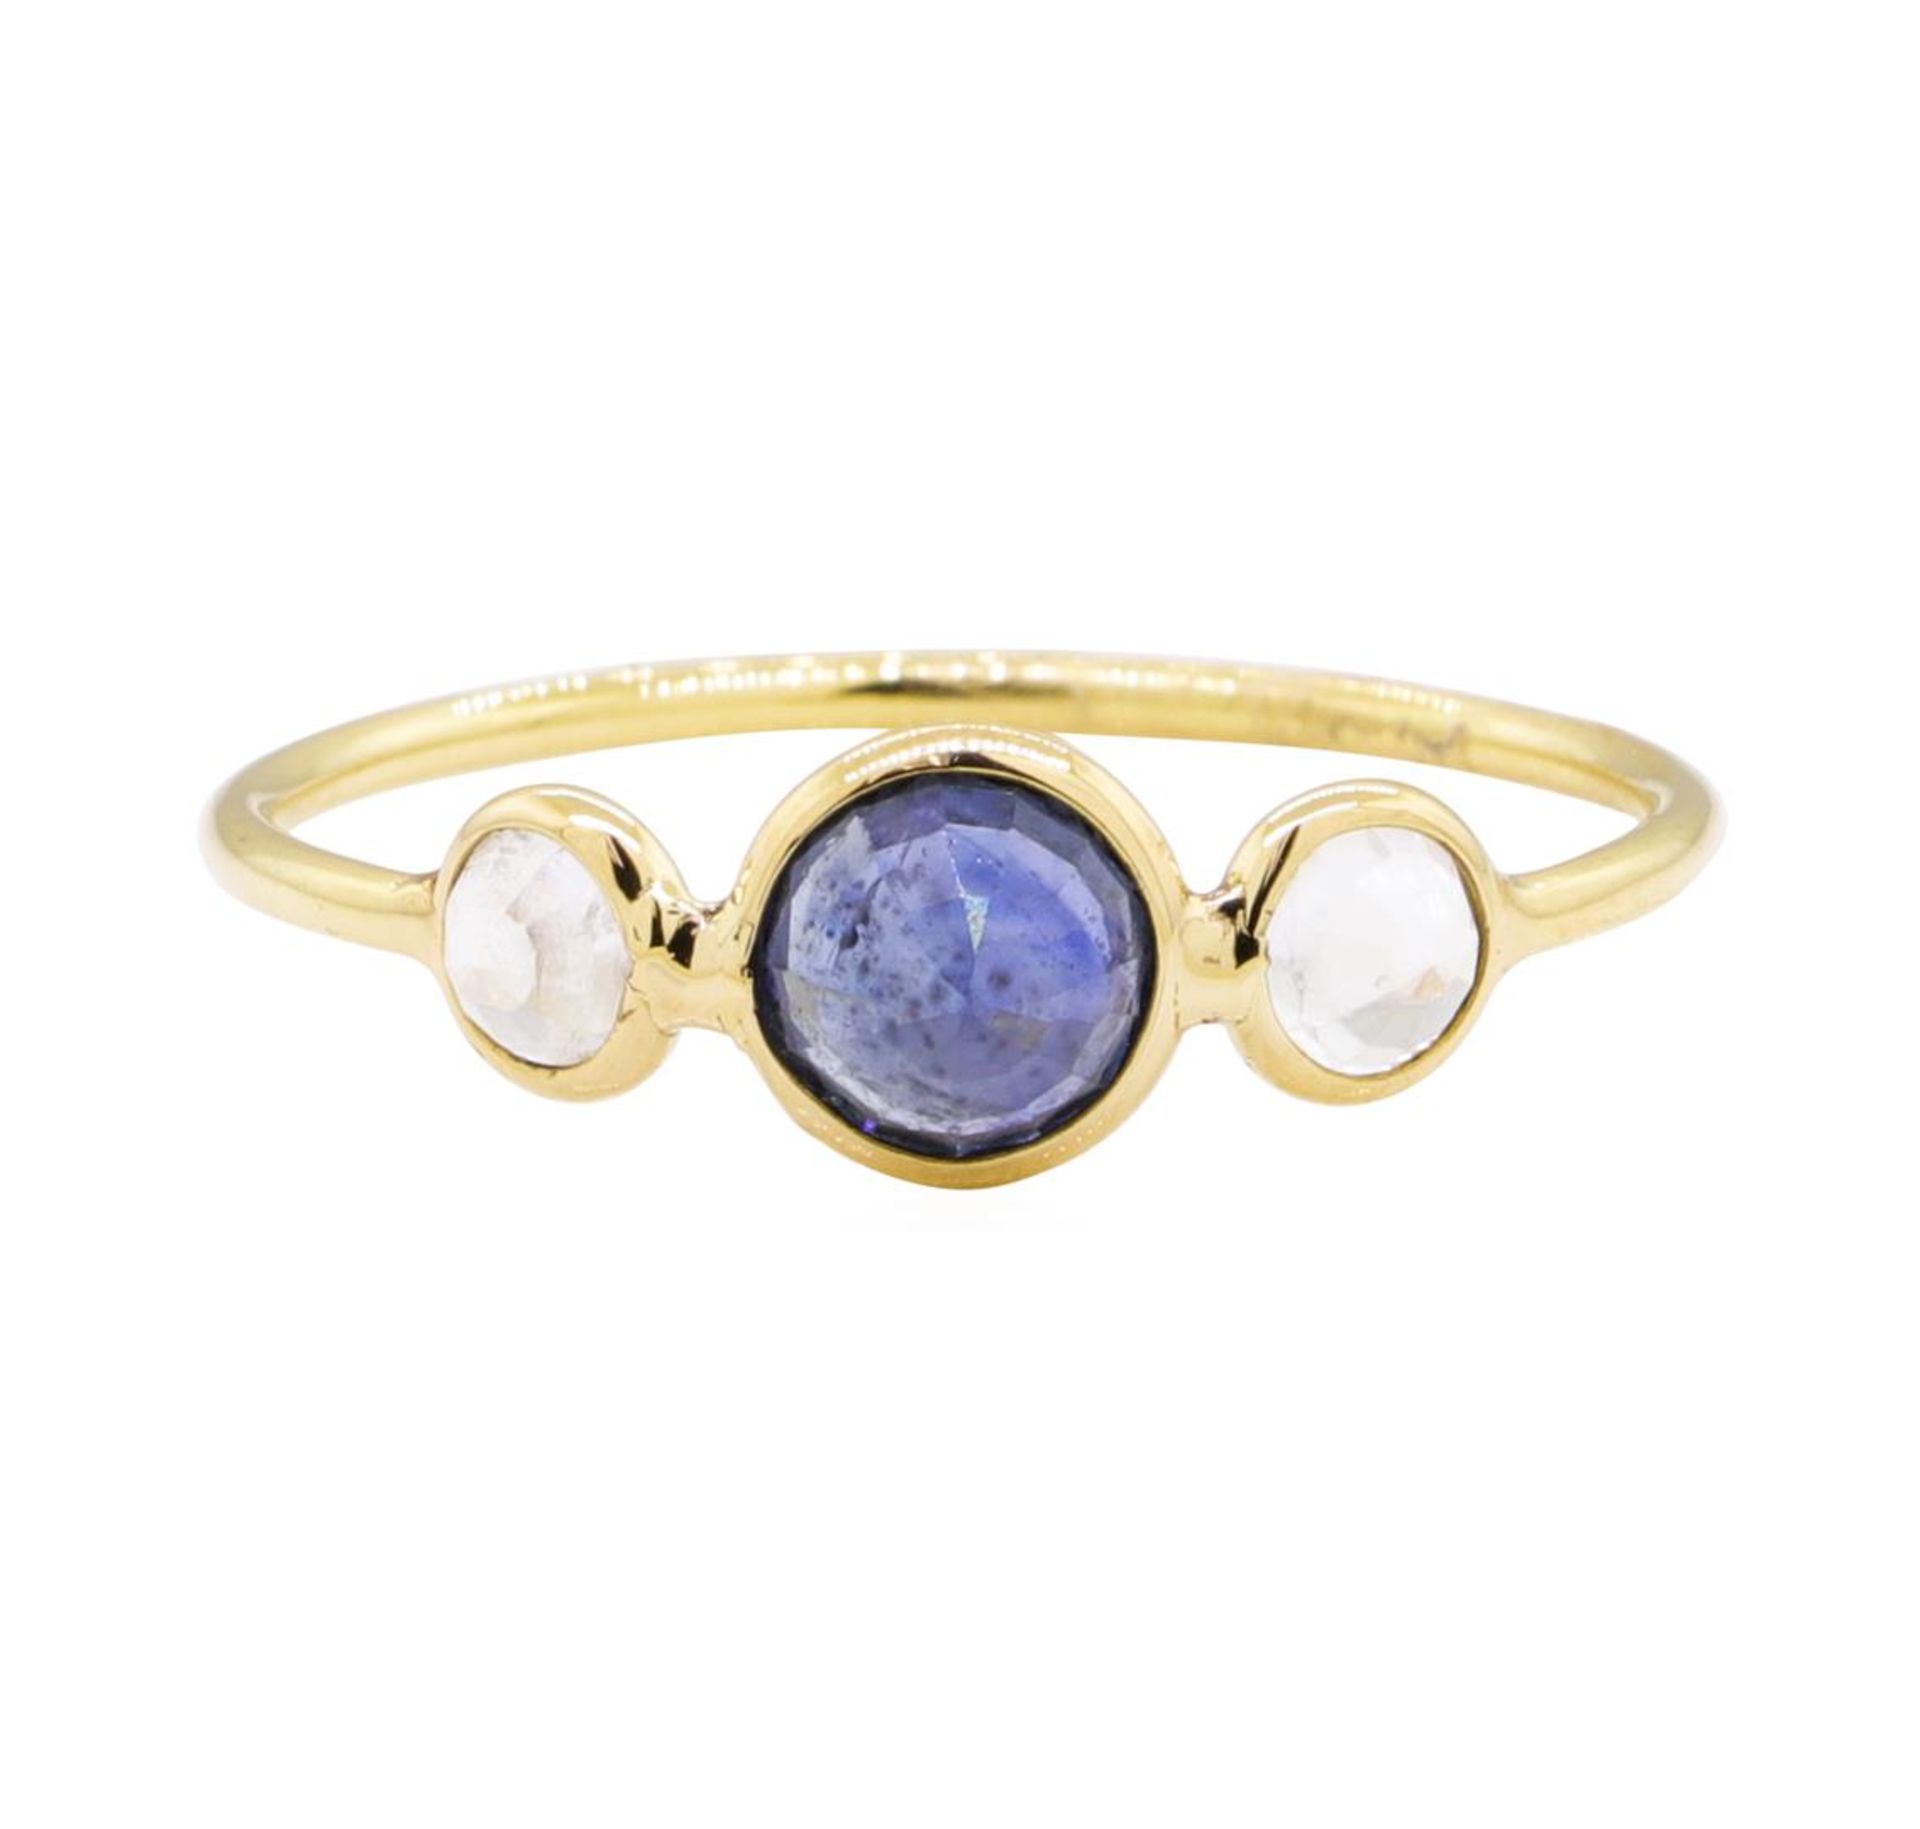 1.20 ctw Sapphire and Moonstone Ring - 18KT Yellow Gold - Image 2 of 4